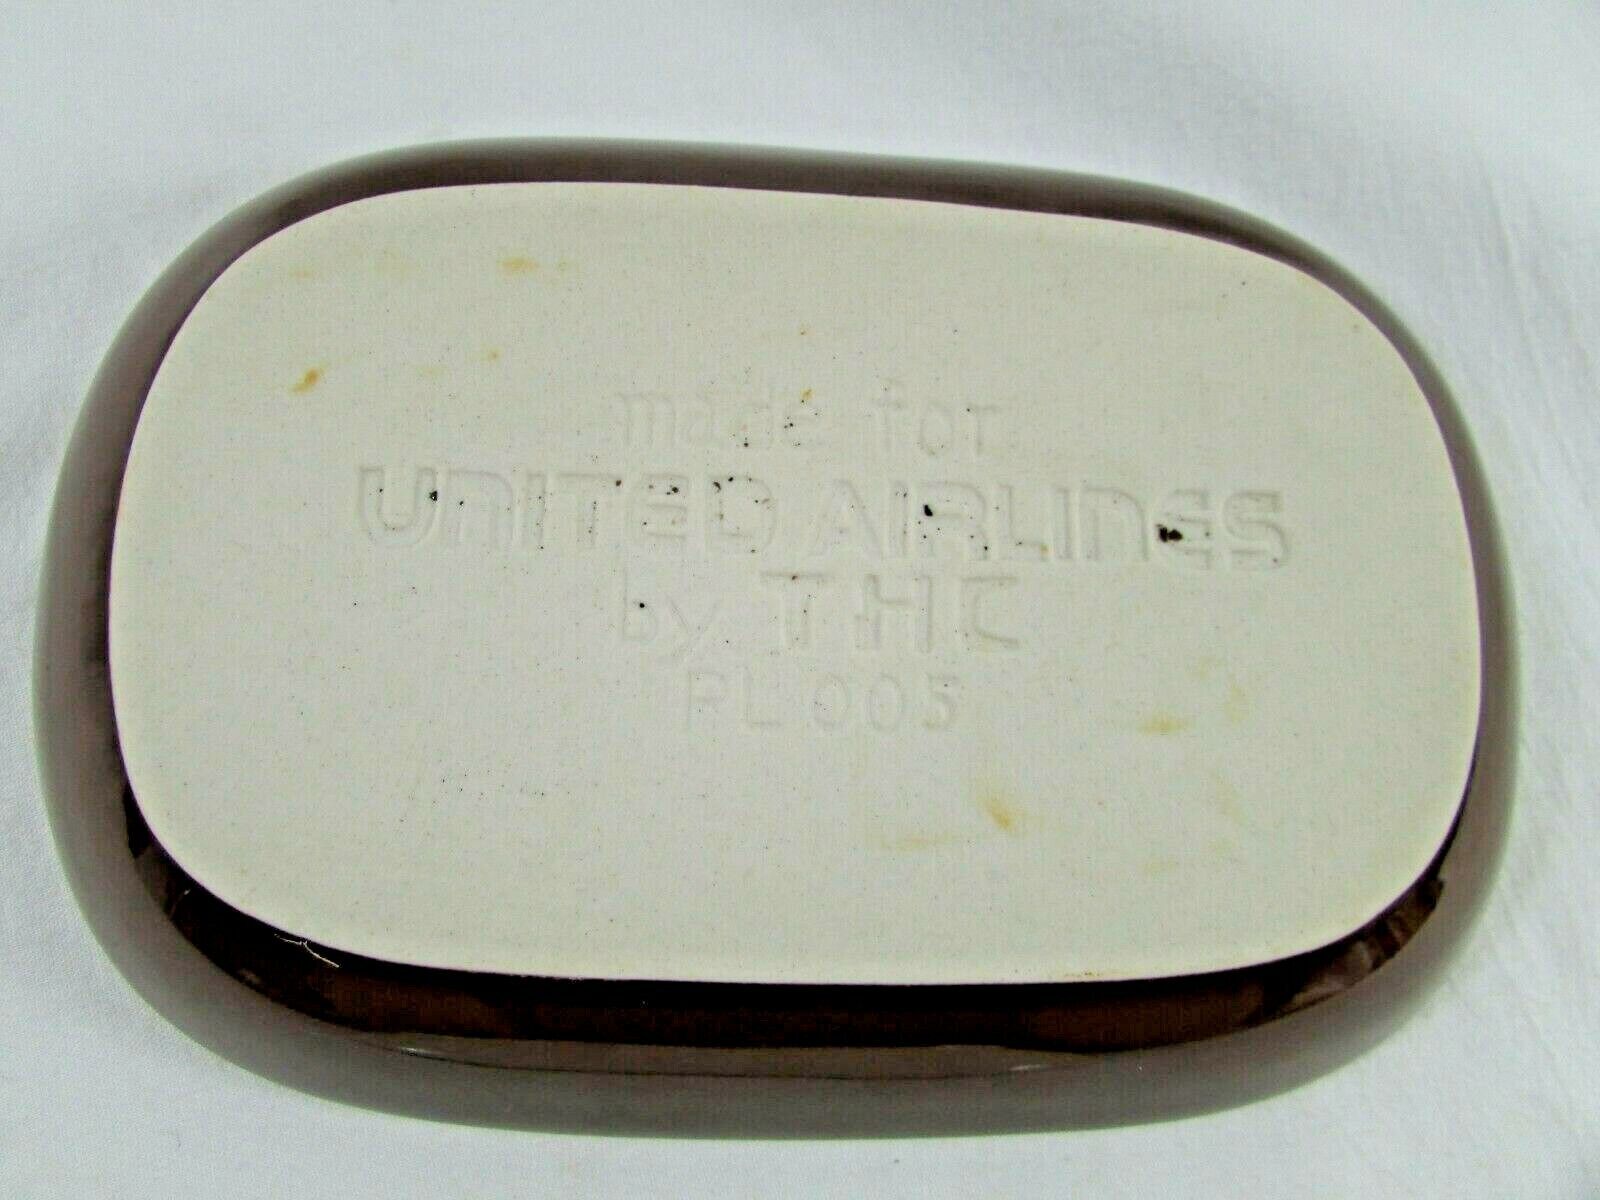 2 Dishes For UNITED AIRLINES & Eastern Airlines By THC Systems PL005 Vintage Без бренда PL 005 - фотография #10